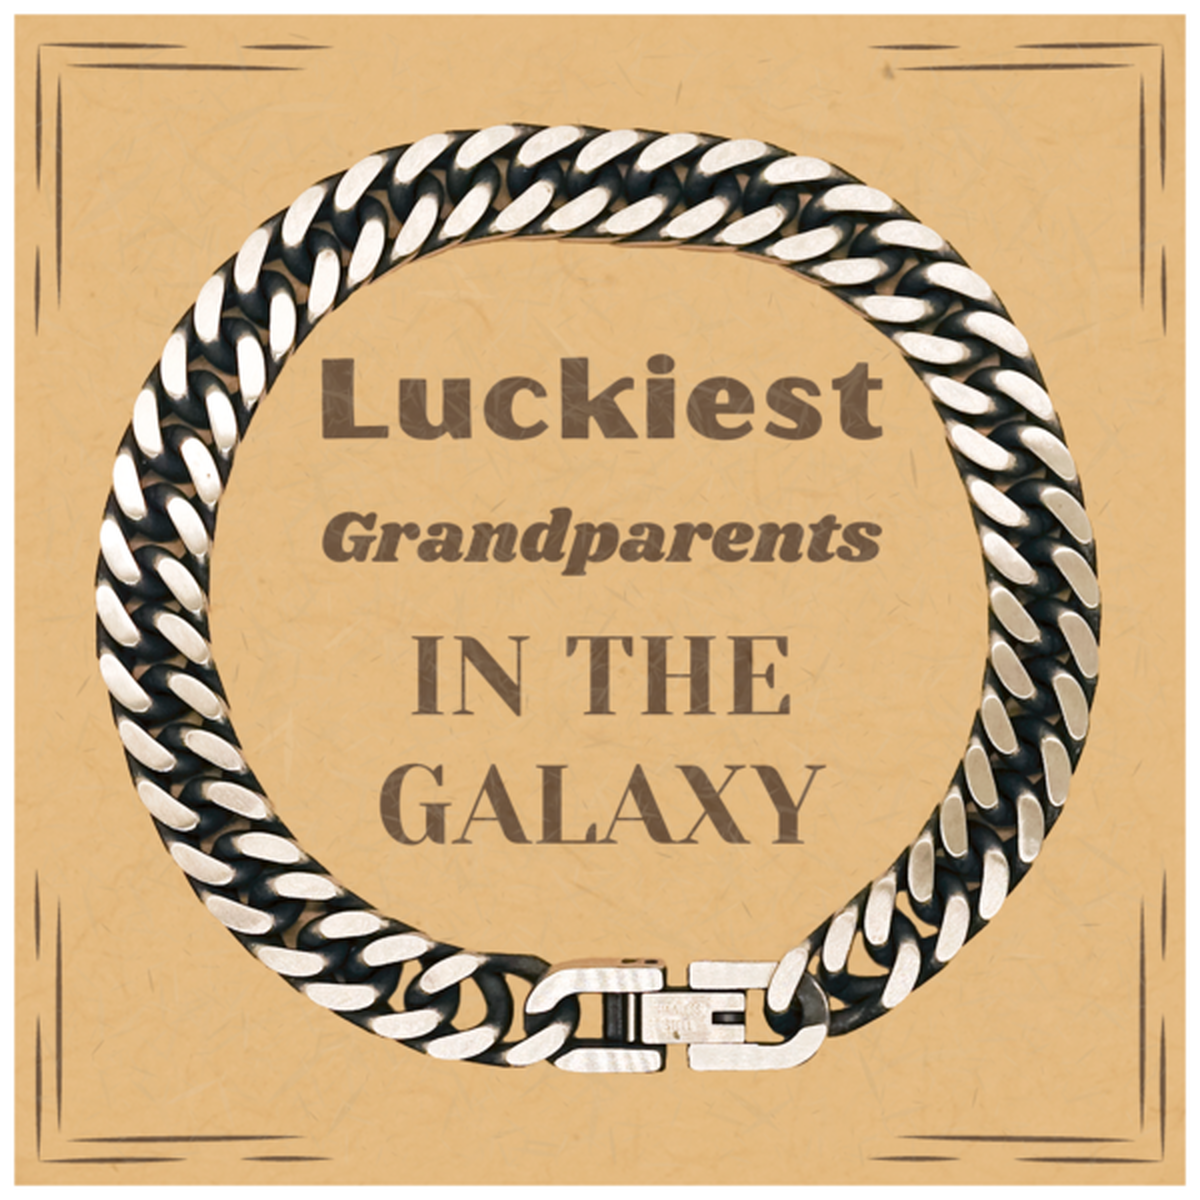 Luckiest Grandparents in the Galaxy, To My Grandparents Message Card Gifts, Christmas Grandparents Cuban Link Chain Bracelet Gifts, X-mas Birthday Unique Gifts For Grandparents Men Women